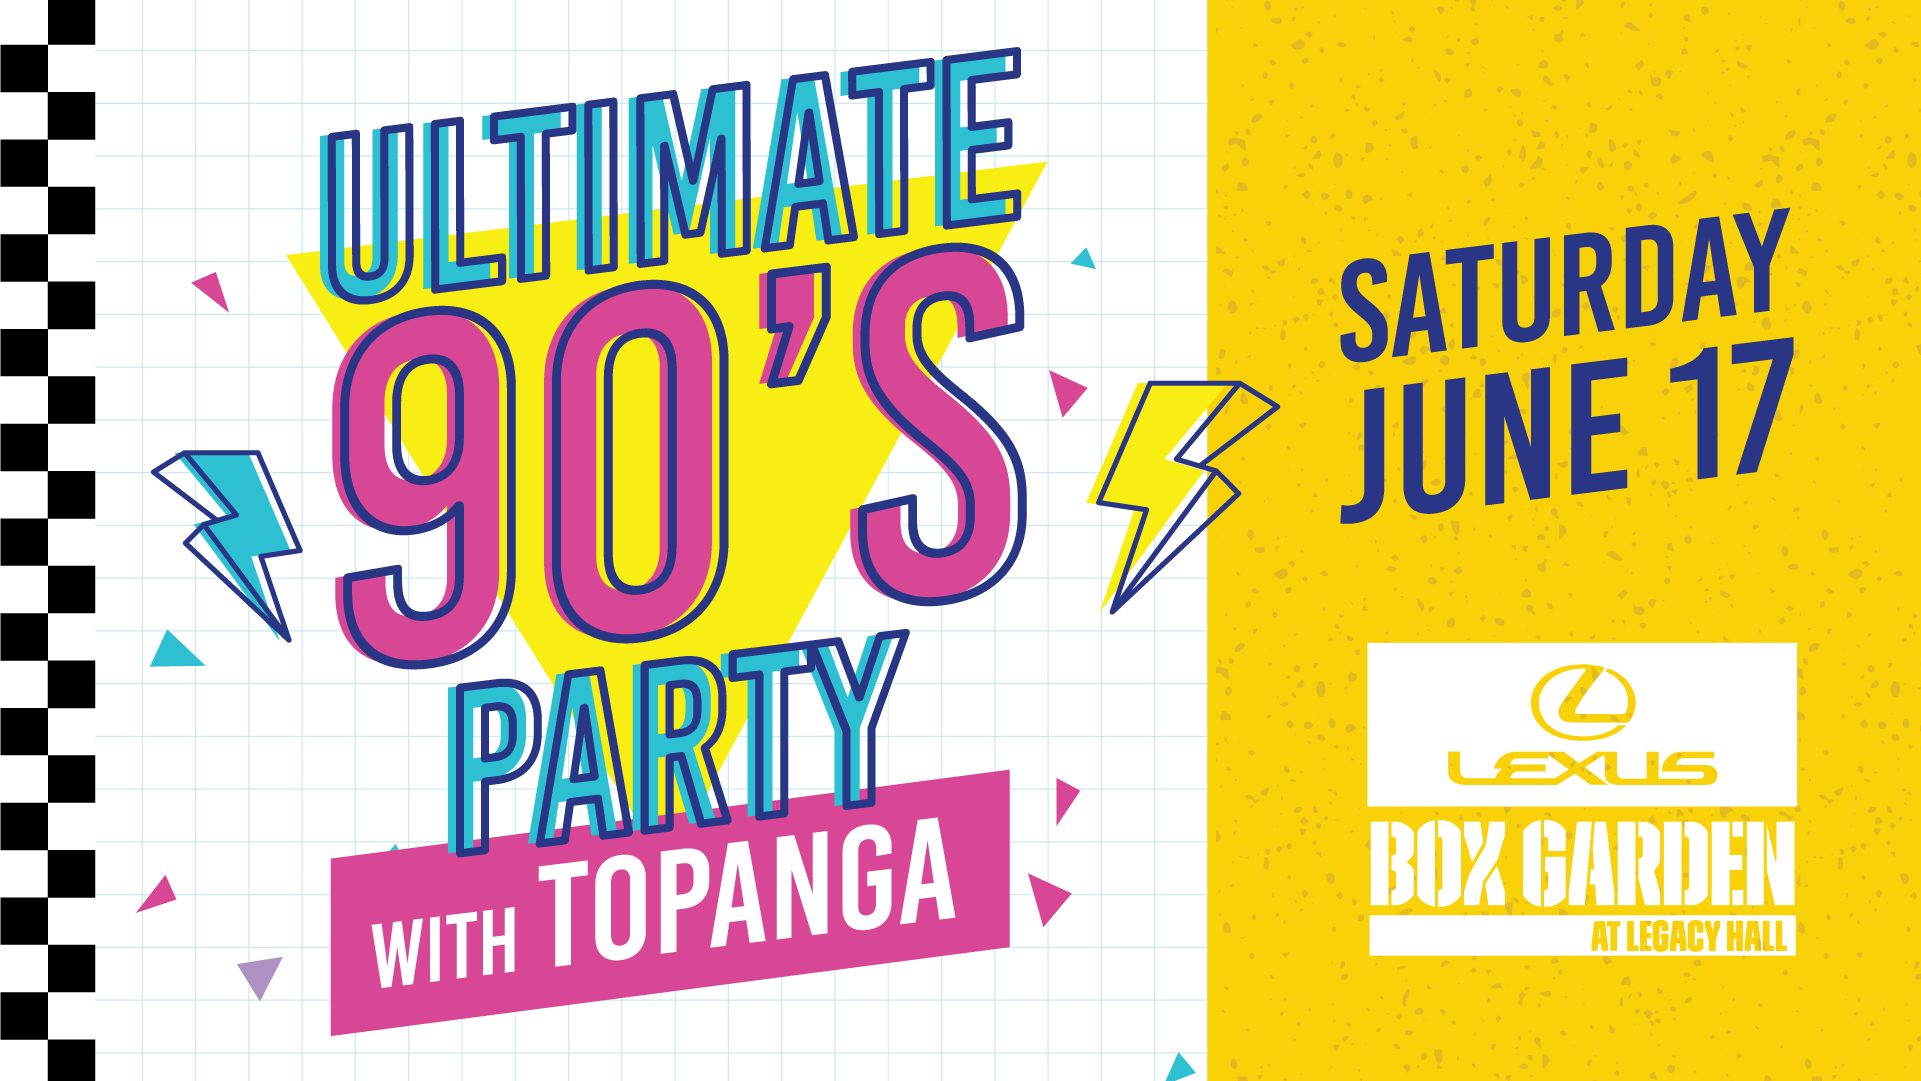 Promo image of Ultimate 90s Party with Topanga